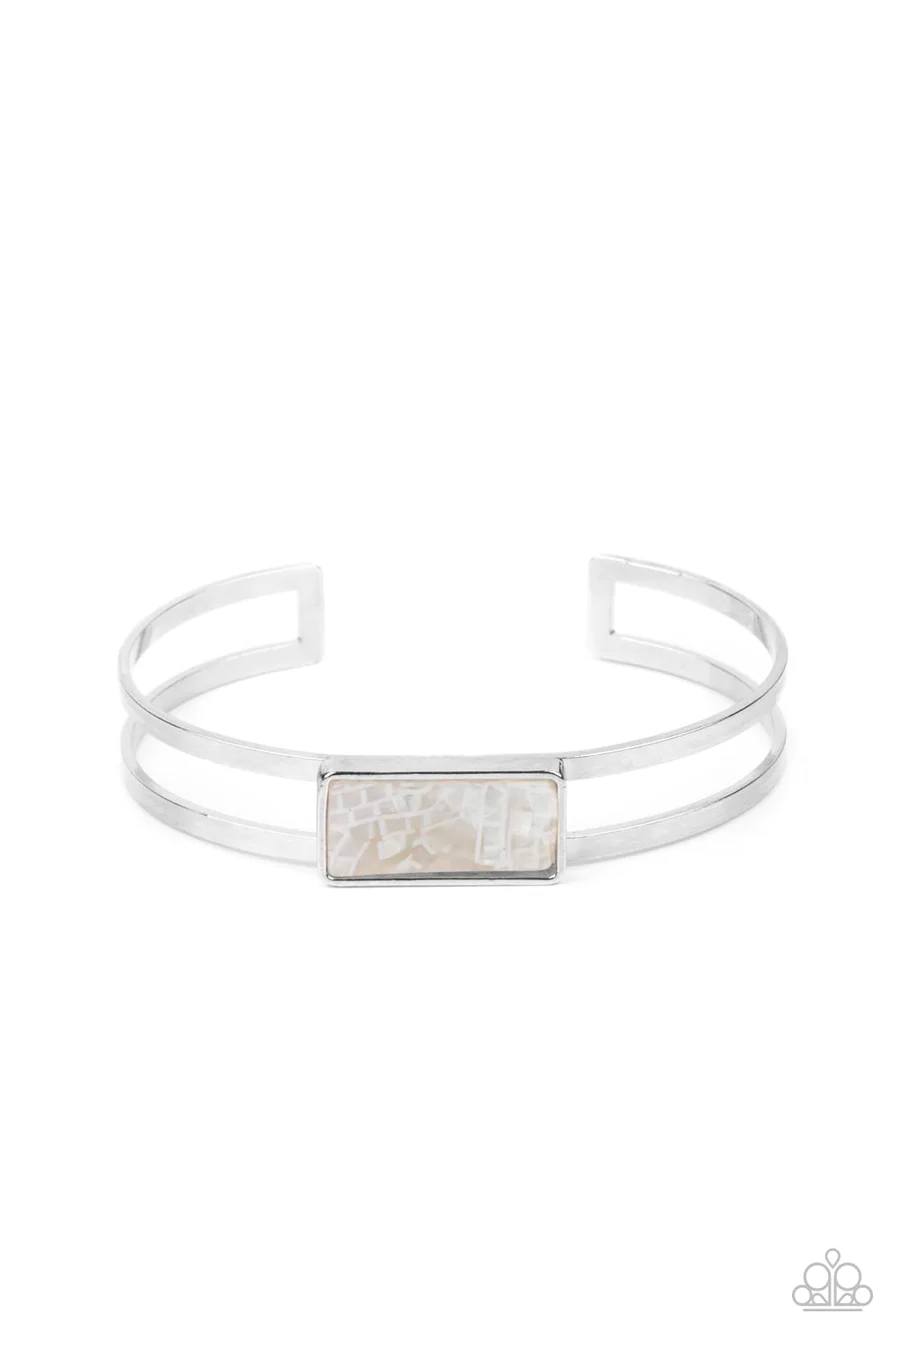 PERFECT MATCH / SET: South Beach Beauty - White Faux Shell Rhinestone Silver Medium Necklace AND Remarkably Cute and Resolute - White Acrylic Shell Rectangle Silver Frame Cuff Bracelet